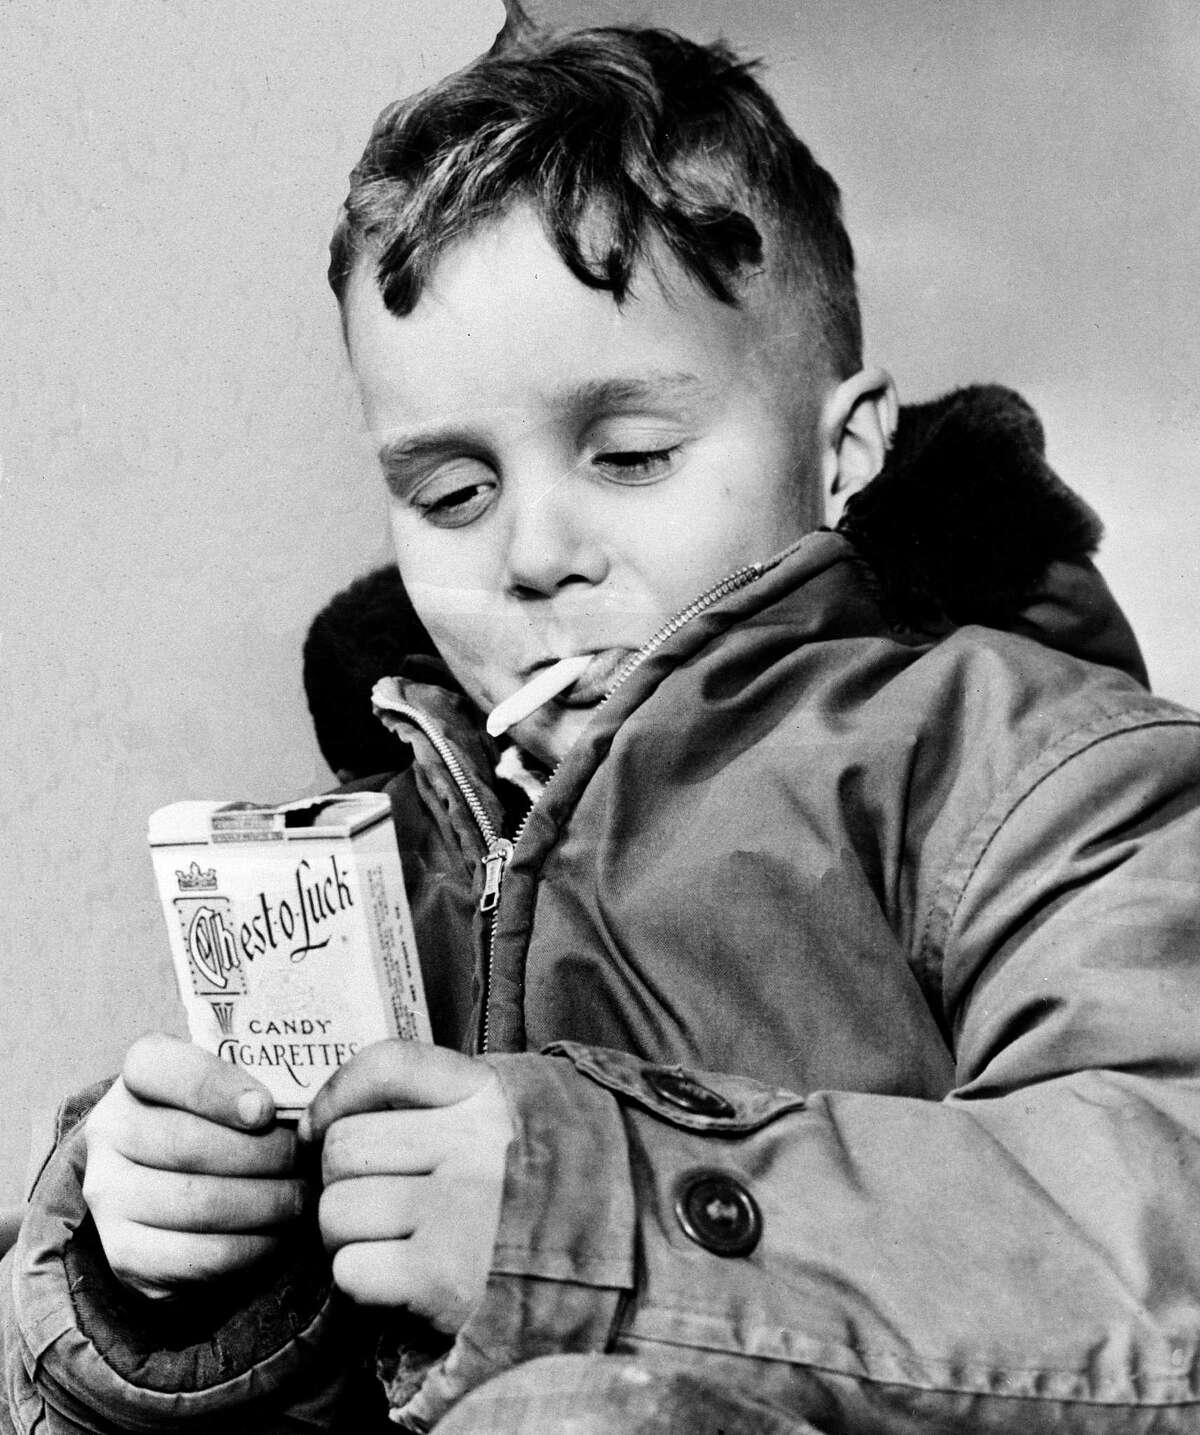 Candy cigarettes Some of us who still smoke can likely trace their smoking origins to picking up a pack of the candy treats. You would later learn though that the real cigs don't taste so sweet. 